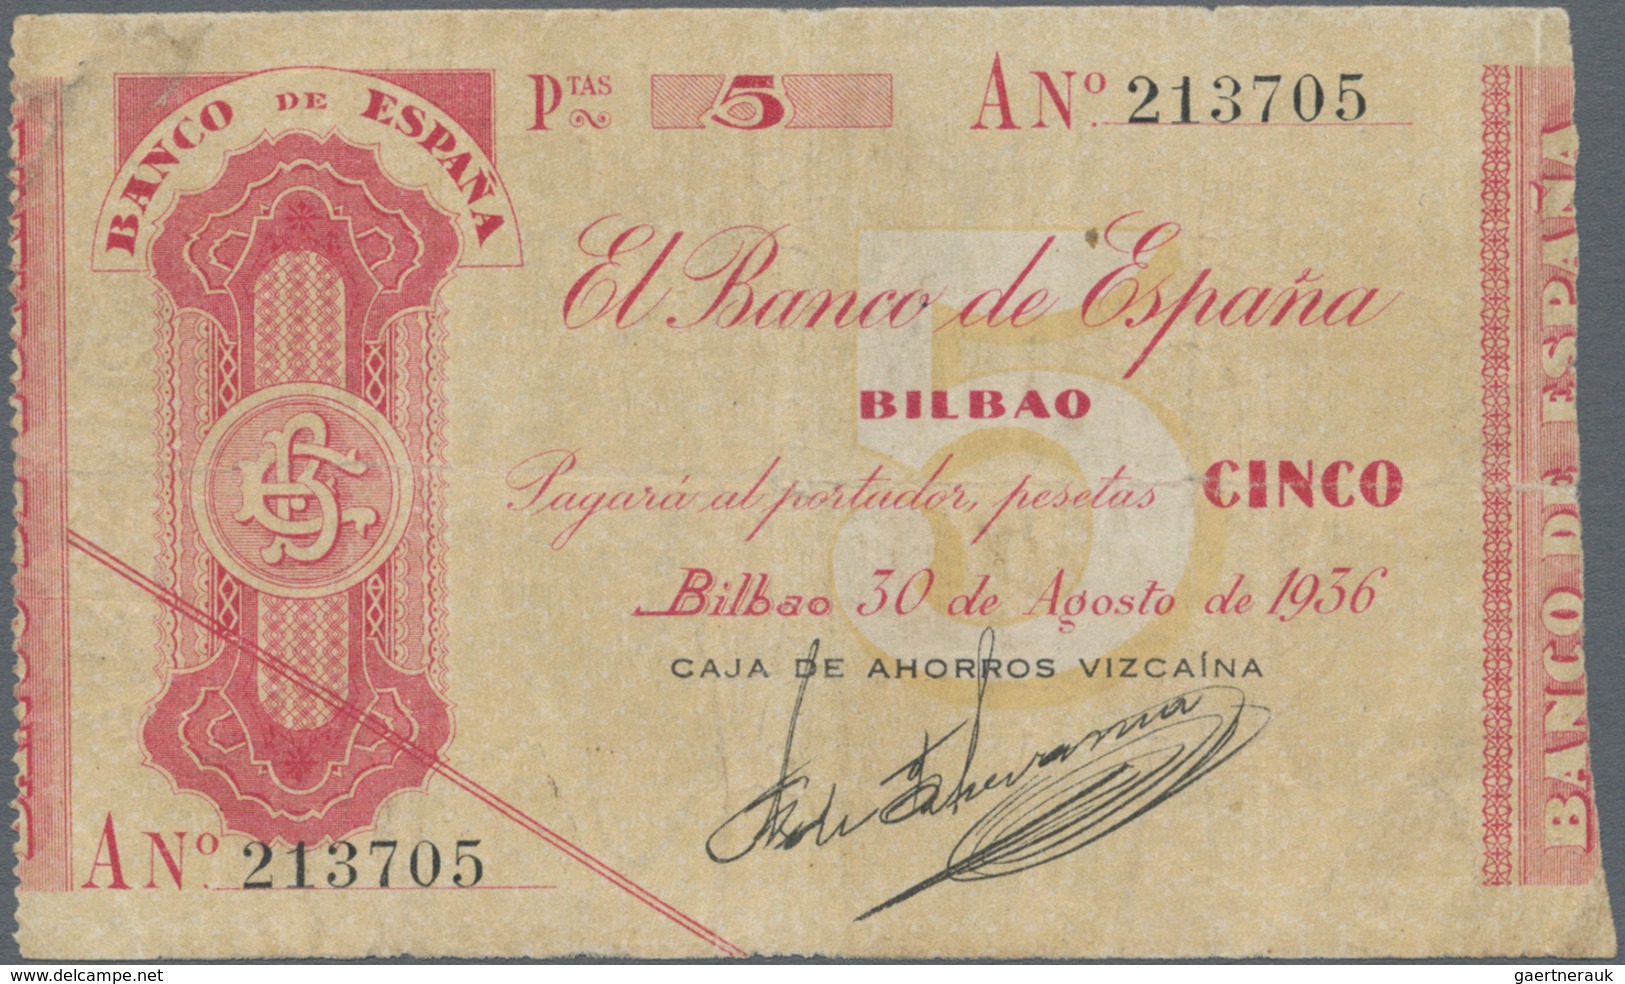 Spain / Spanien: BILBAO – set with 4 banknotes 5, 25, 50 and 100 Pesetas 1936, P.S551-S554 in F to V